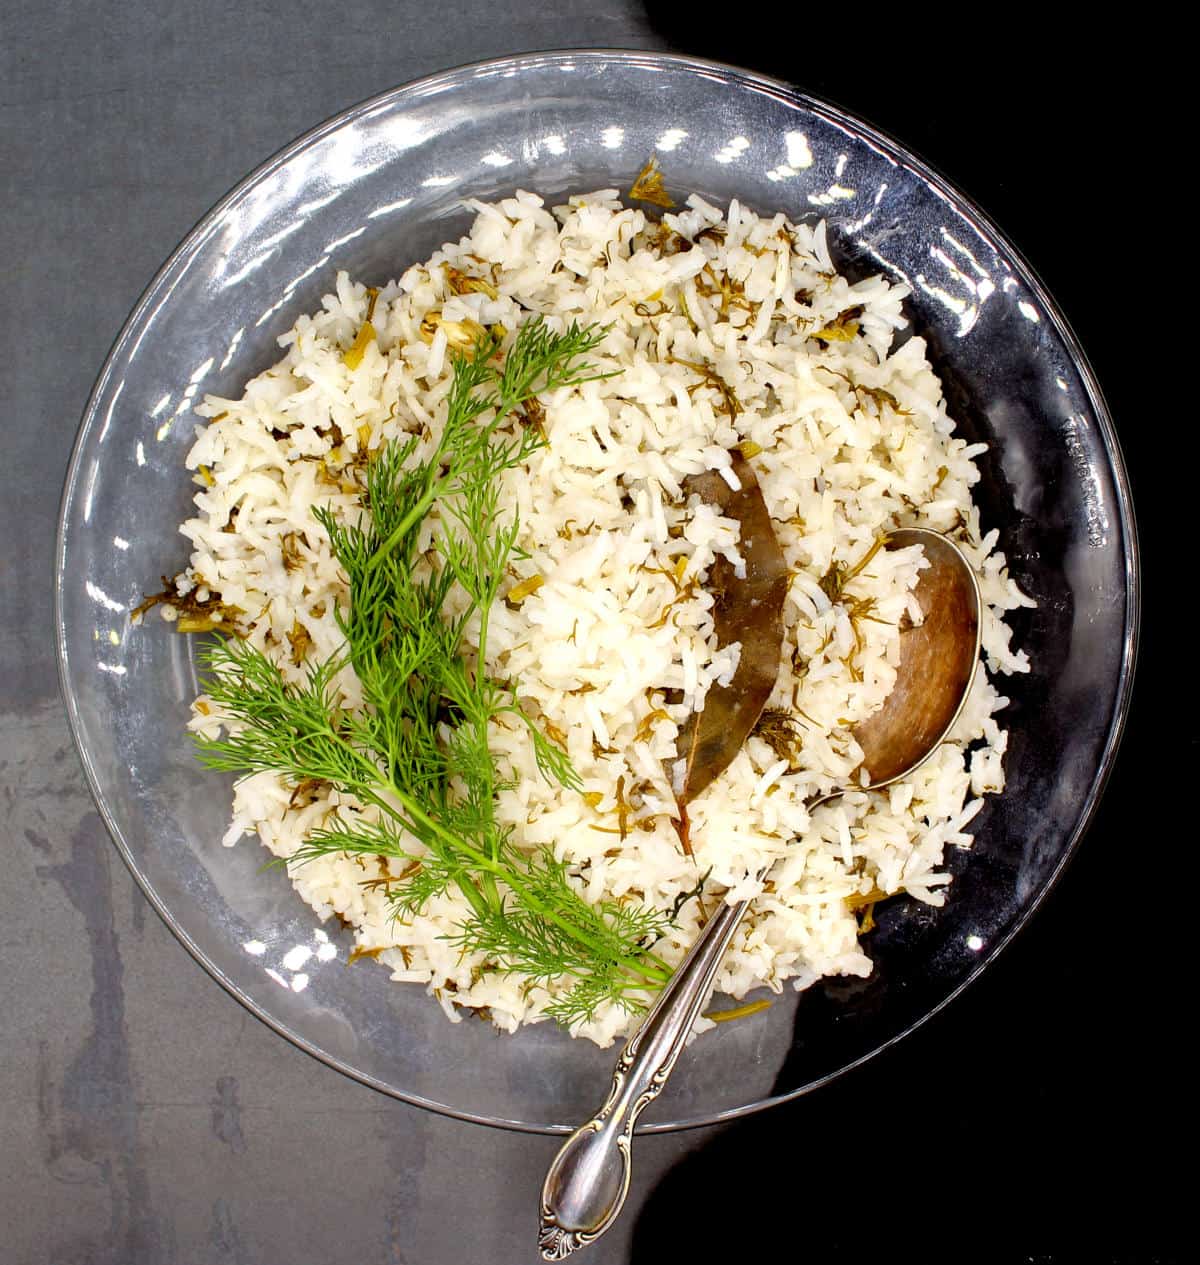 Dill rice in glass bowl with spoon and fresh fronds of dill.